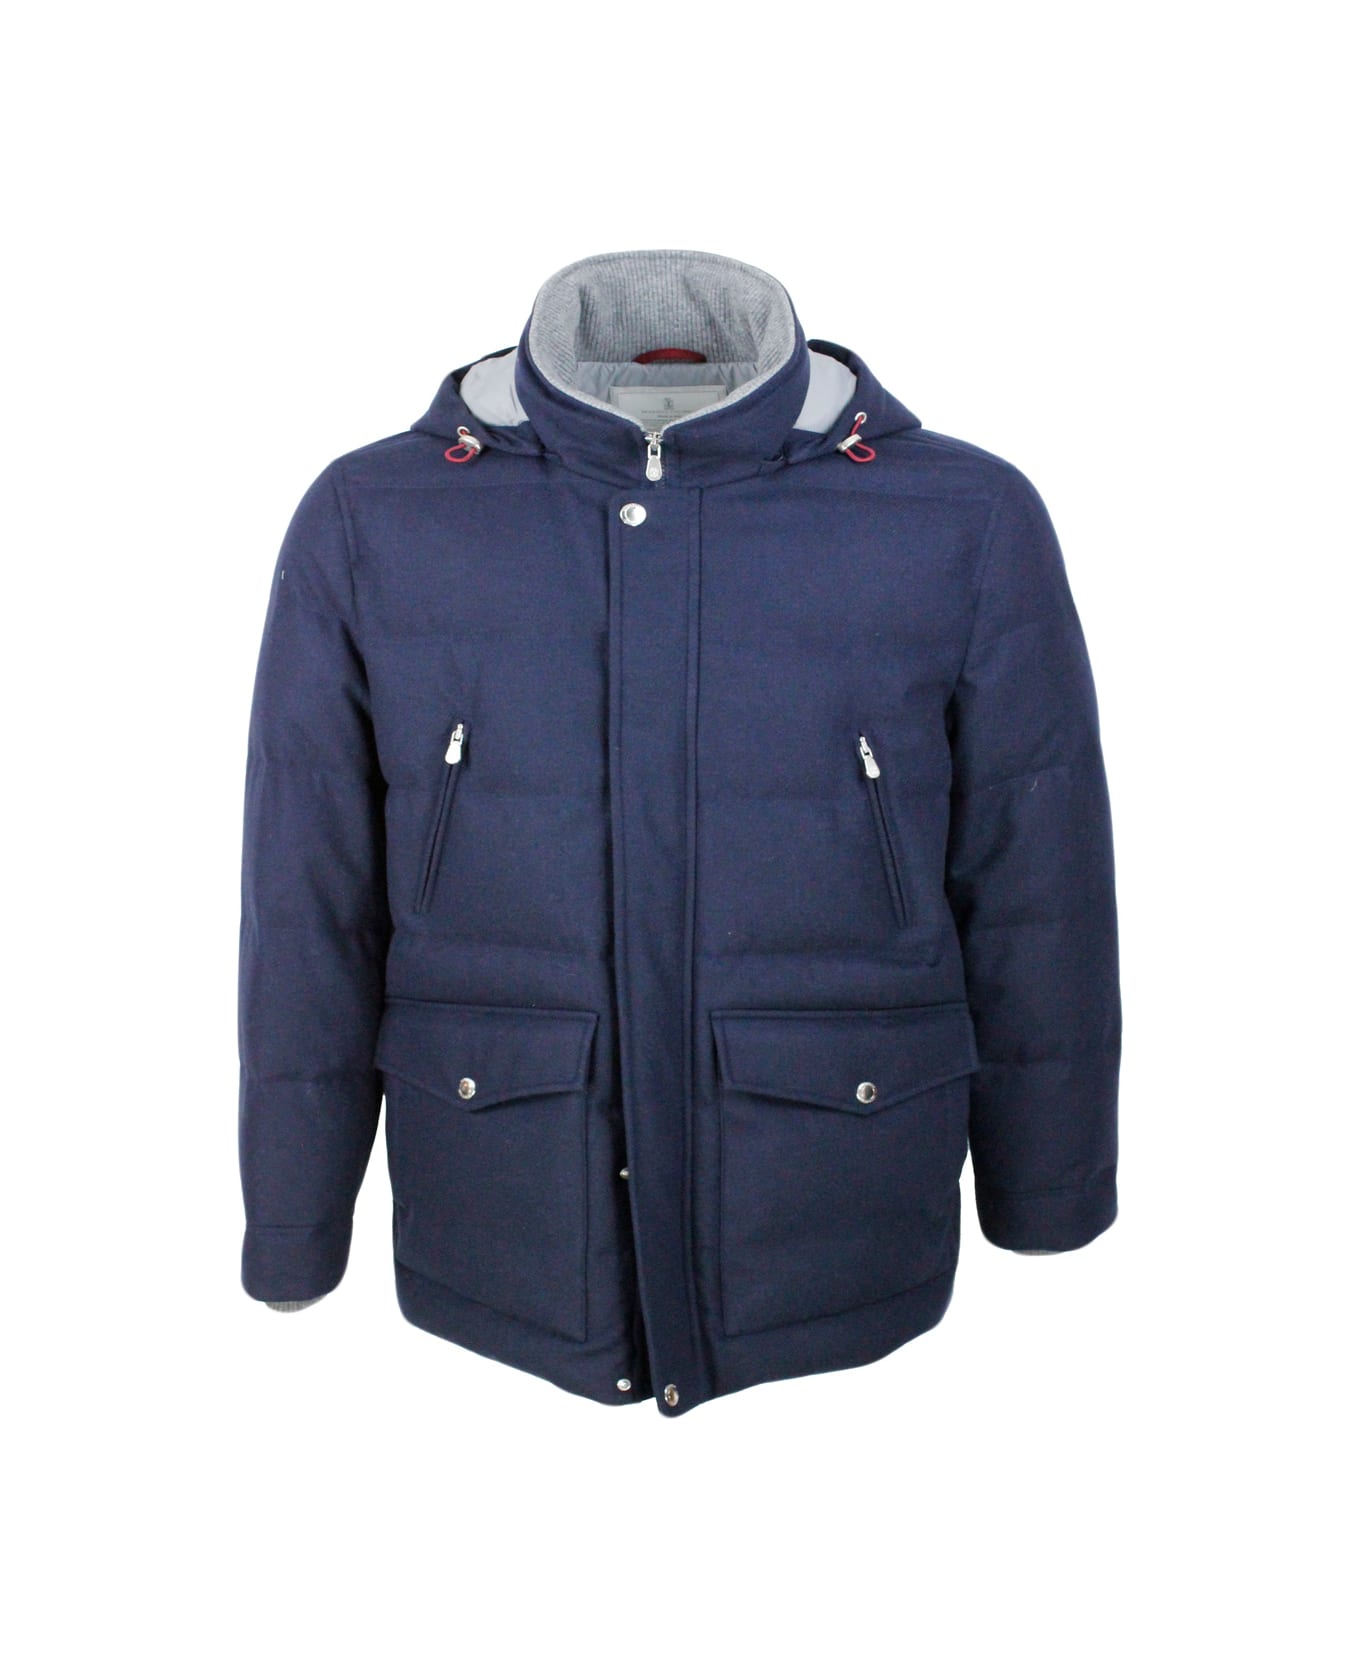 Brunello Cucinelli Down Jacket In Wool, Silk And Cashmere Padded With Fine Goose Down With Detachable Hood And Front Pockets - Blu